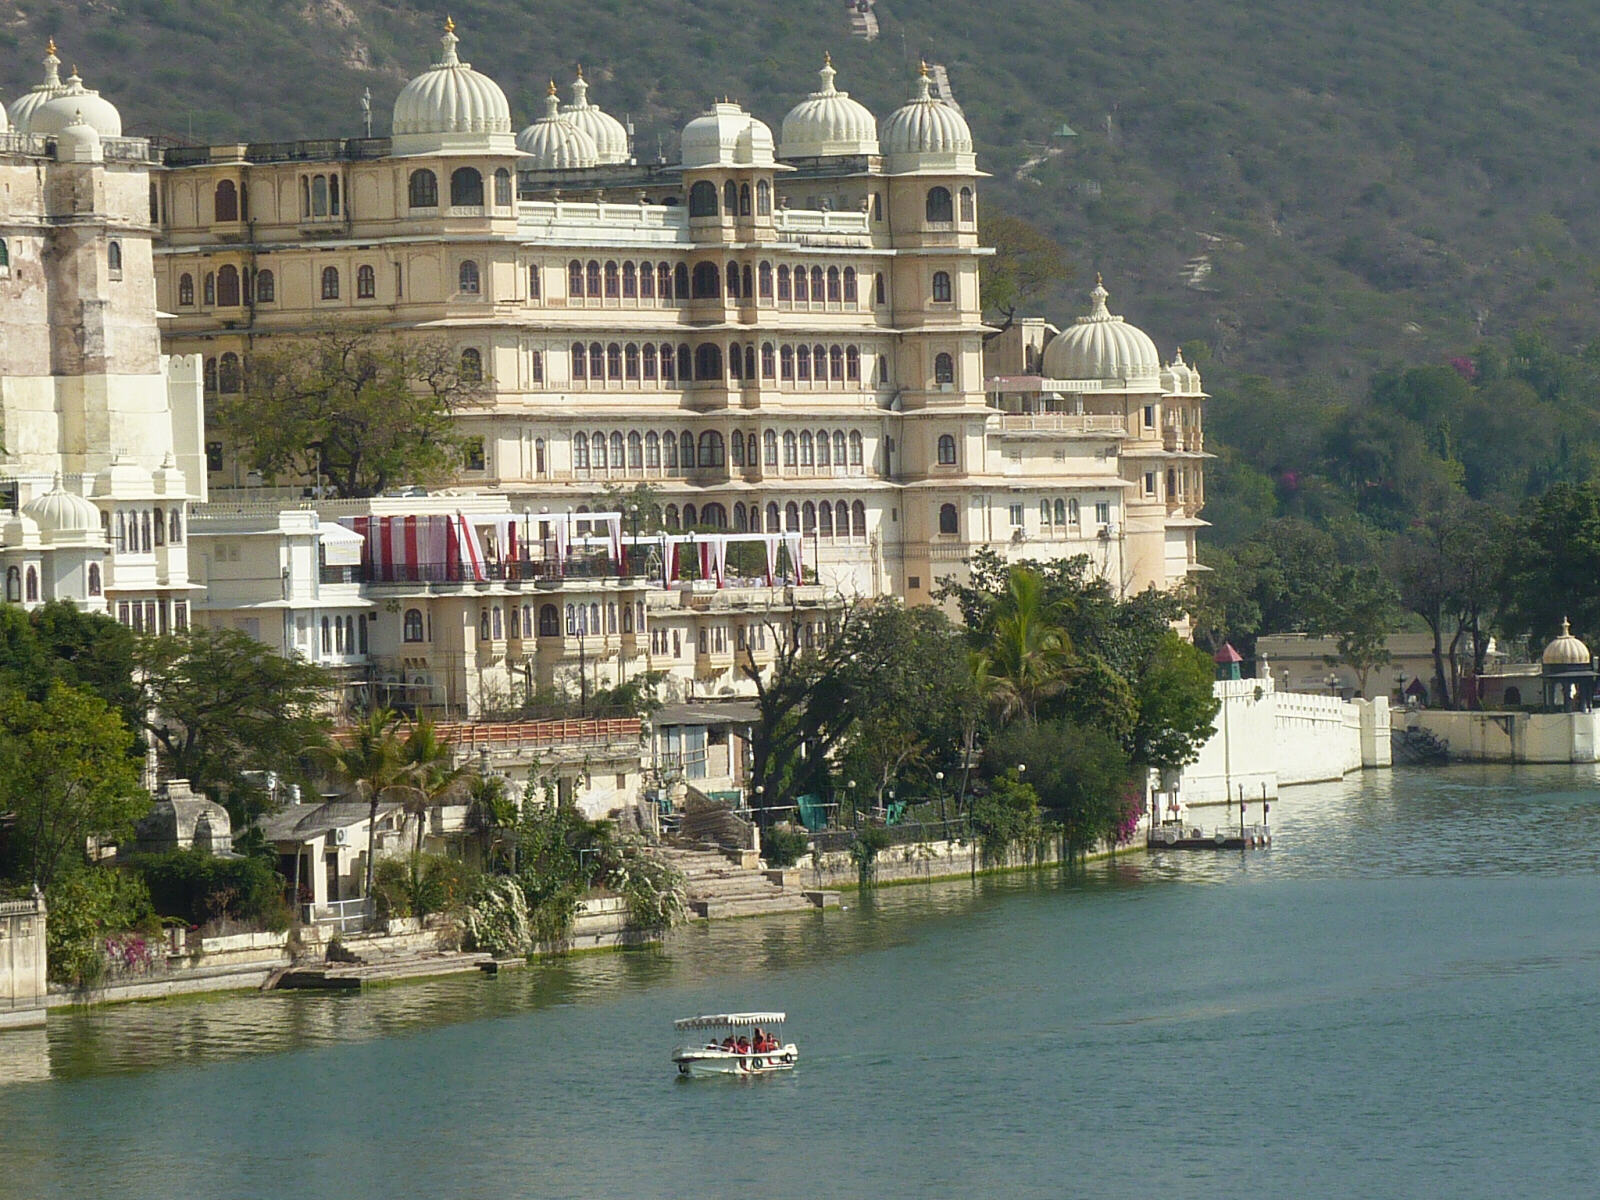 The City Palace in Udaipur, Rajasthan, India